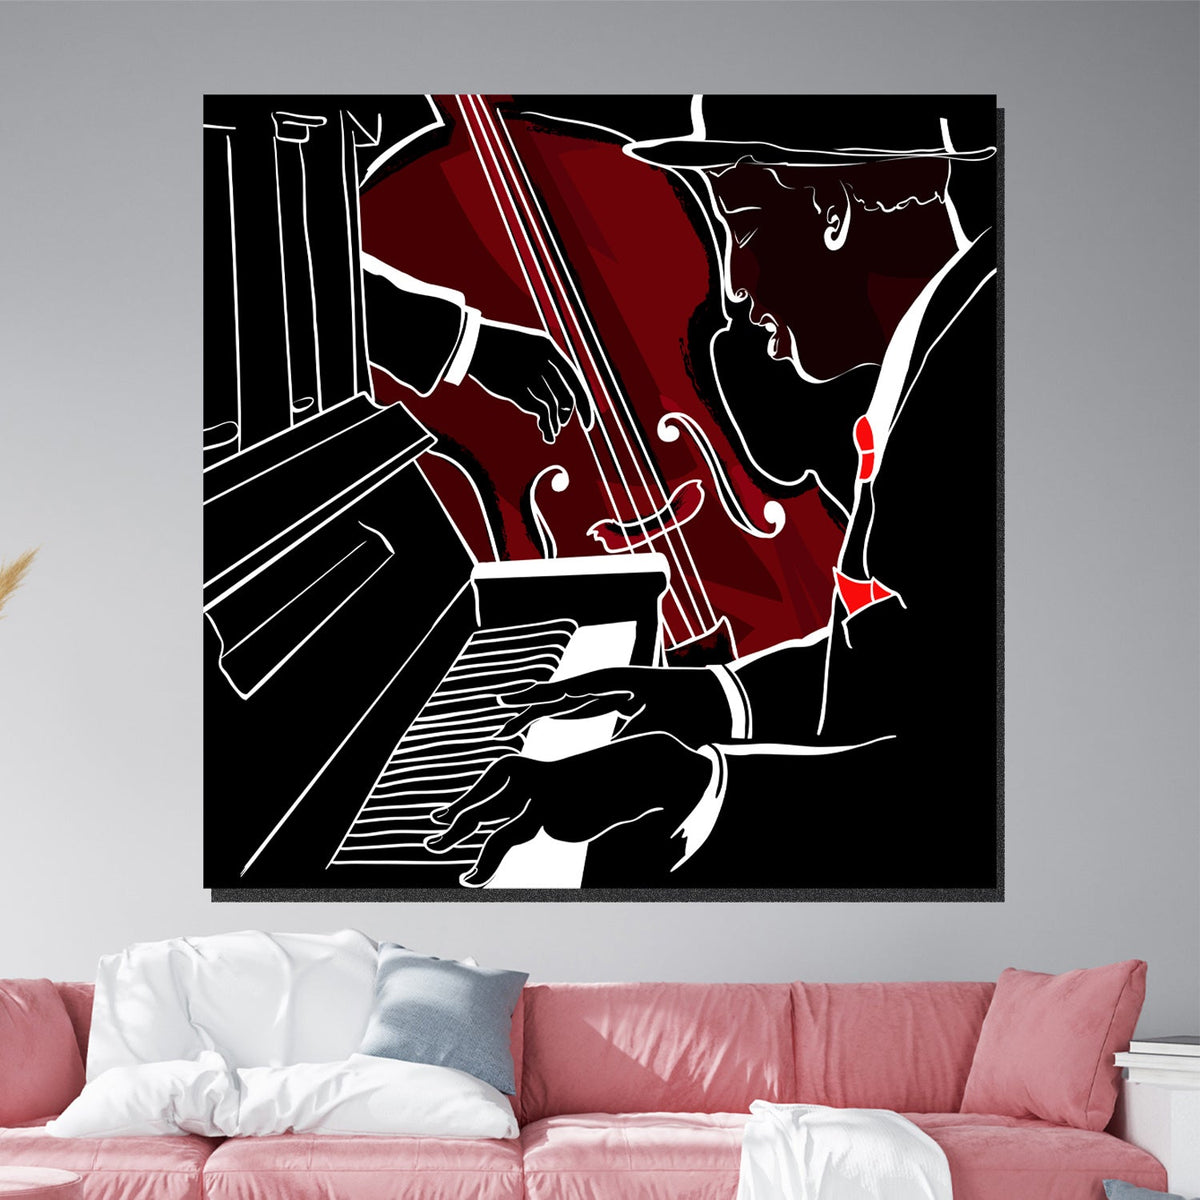 https://cdn.shopify.com/s/files/1/0387/9986/8044/products/PianoandDouble-bassCanvasArtprintStretched-3.jpg